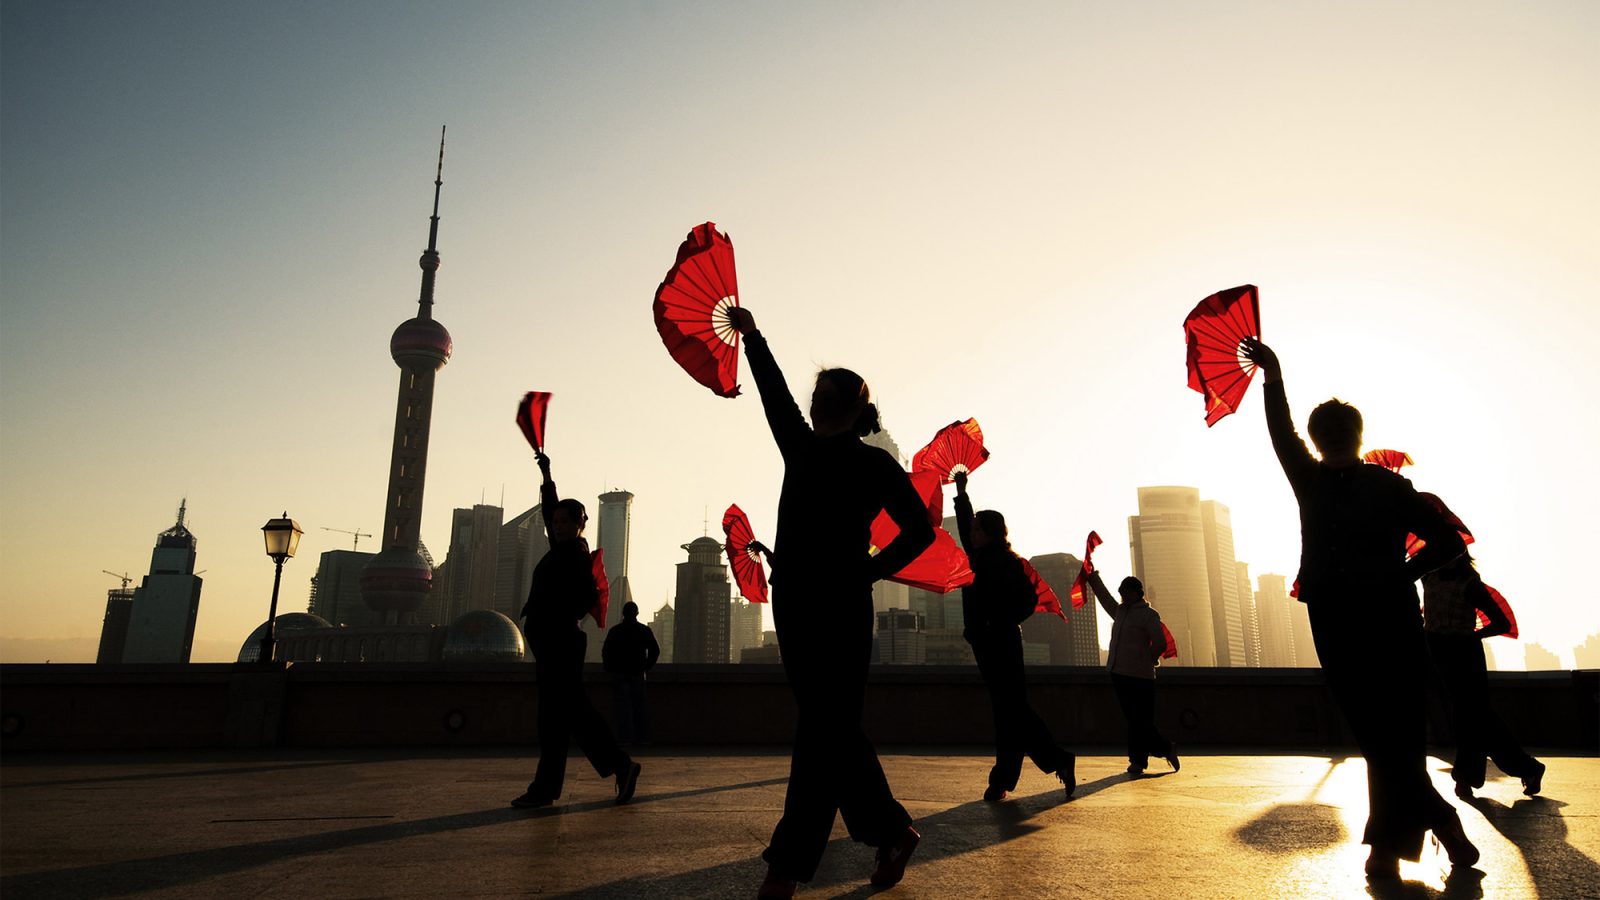 Dancers with red fans in front of Shanghai skyline